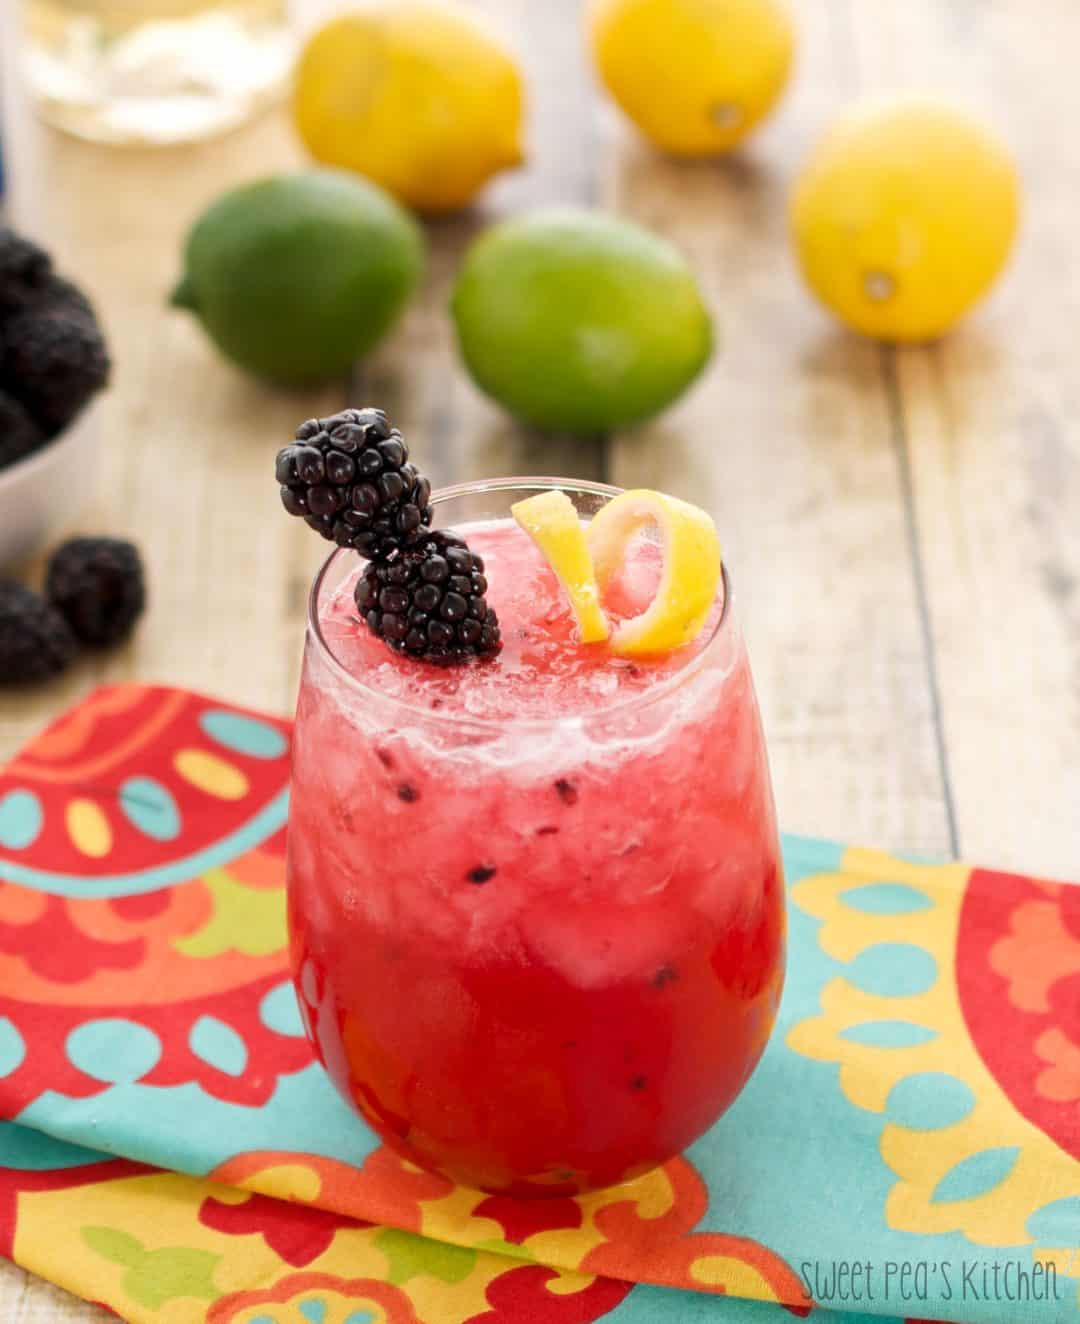 A small glass of blackberry bramble sitting on a colorful napkin on a wooden surface